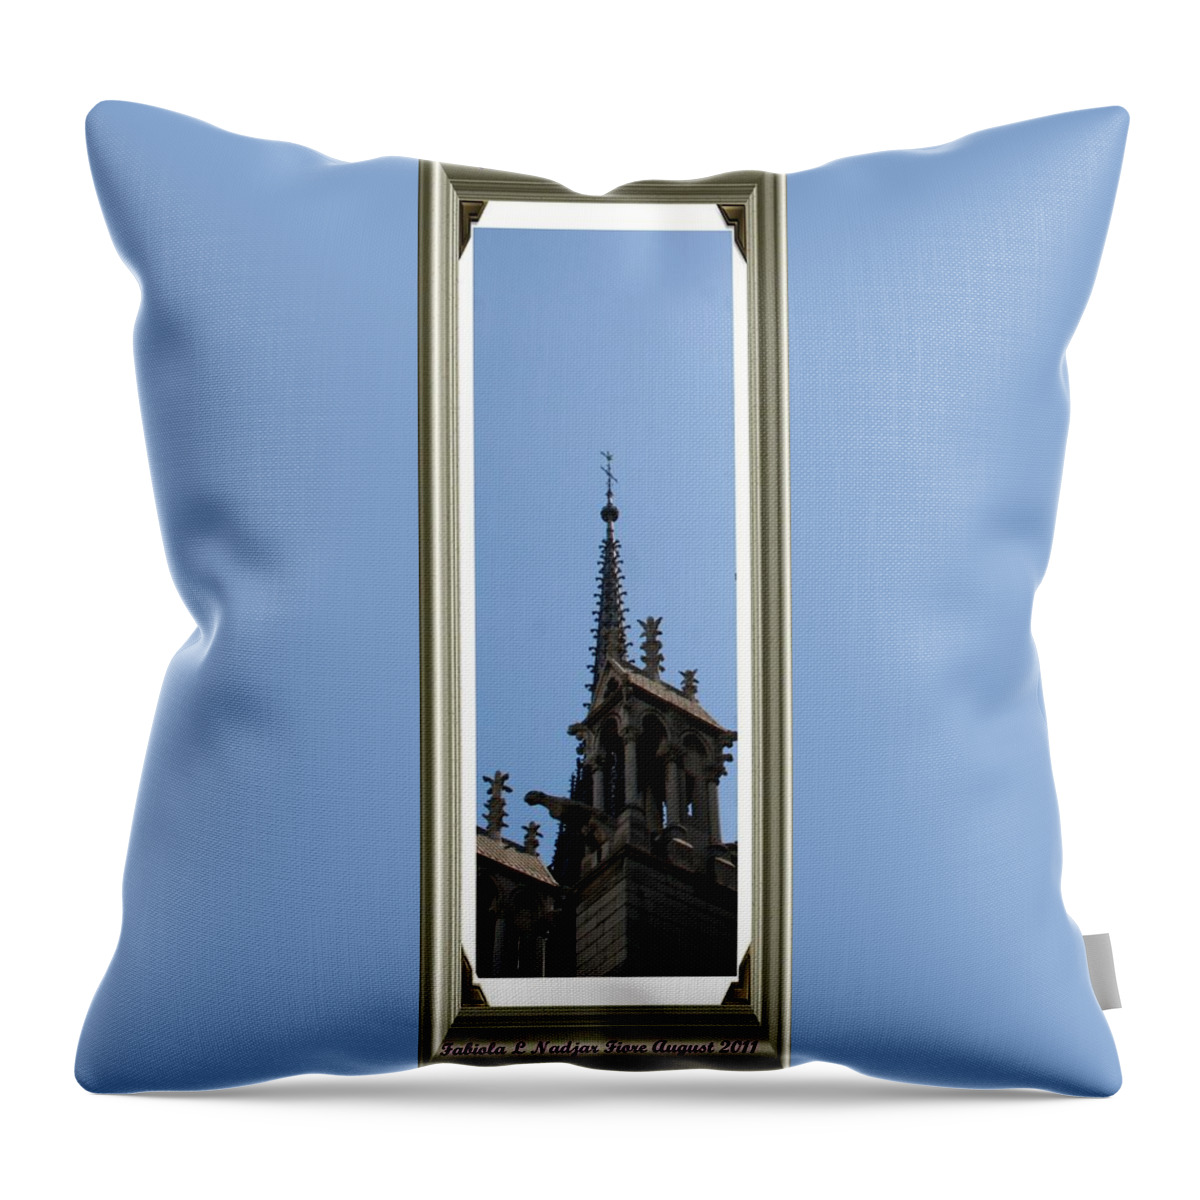 Notre Dame Throw Pillow featuring the photograph Notre Dame Arch #4 by Fabiola L Nadjar Fiore